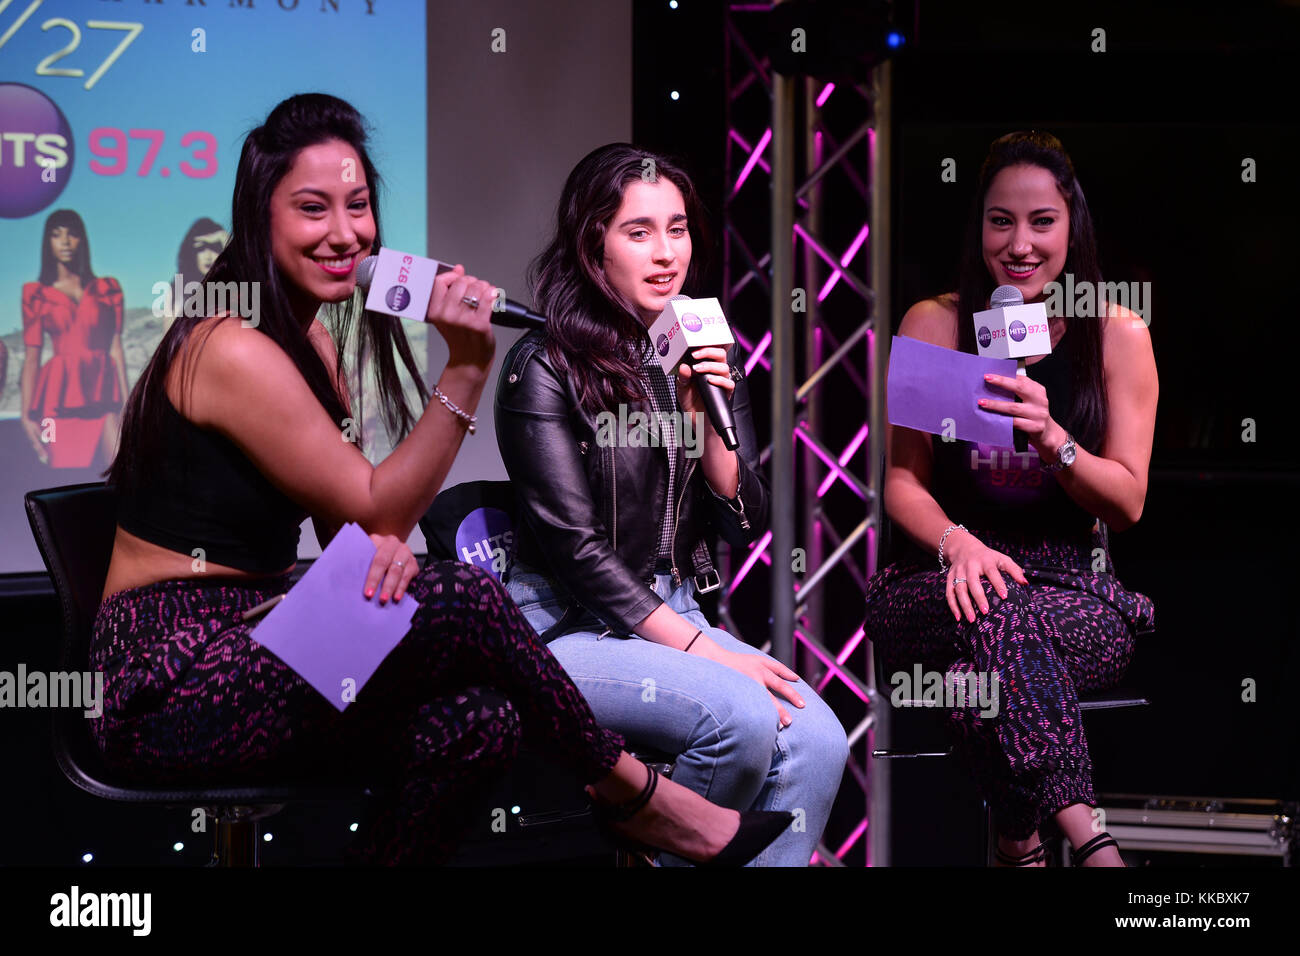 HOLLYWOOD, FL - MARCH 01: Lauren Jauregui of Fifth Harmony visits radio  station 97.3 The Hits on March 1, 2016 in Hollywood, Florida. People: DJ  Lulu, Lauren Jauregui, DJ Lala Stock Photo - Alamy